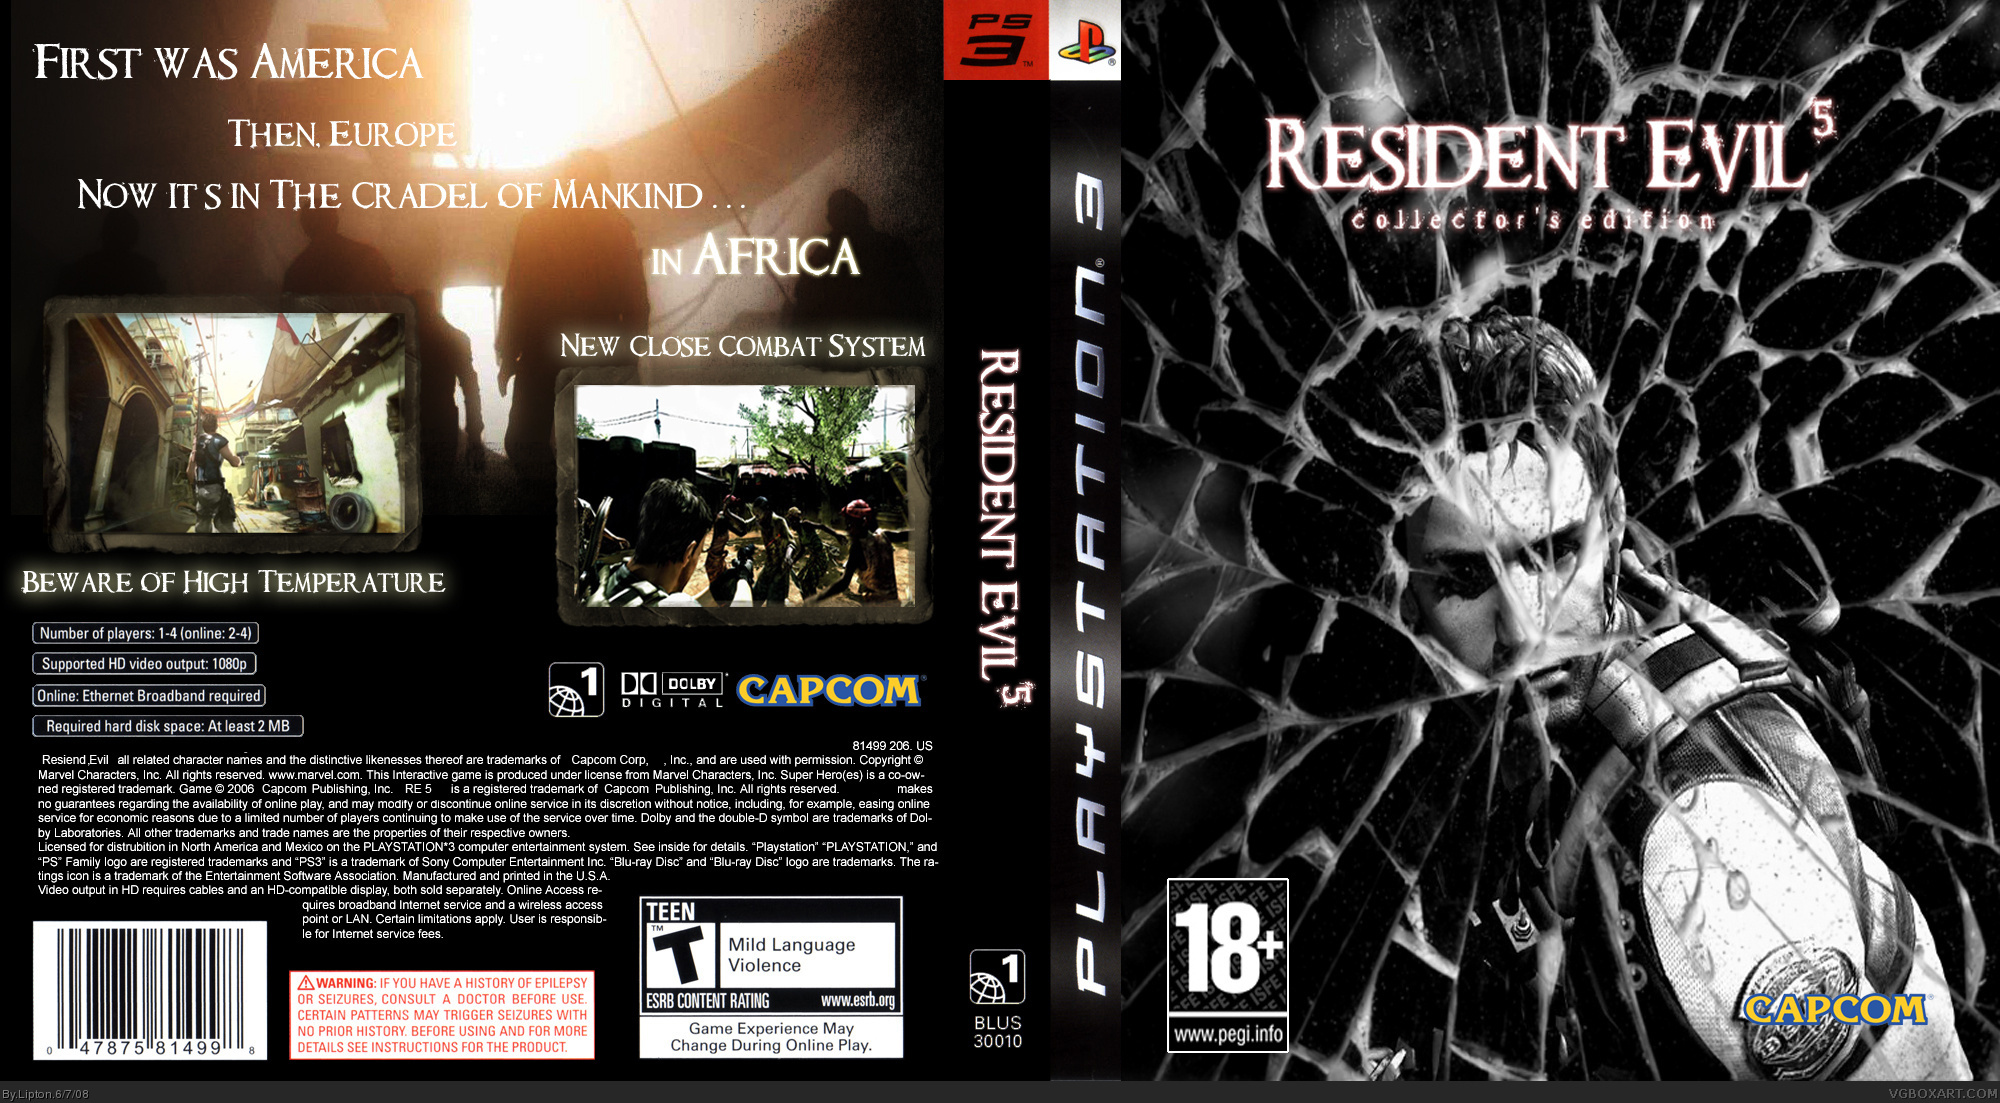 Resident Evil 5: Collector's Edition box cover